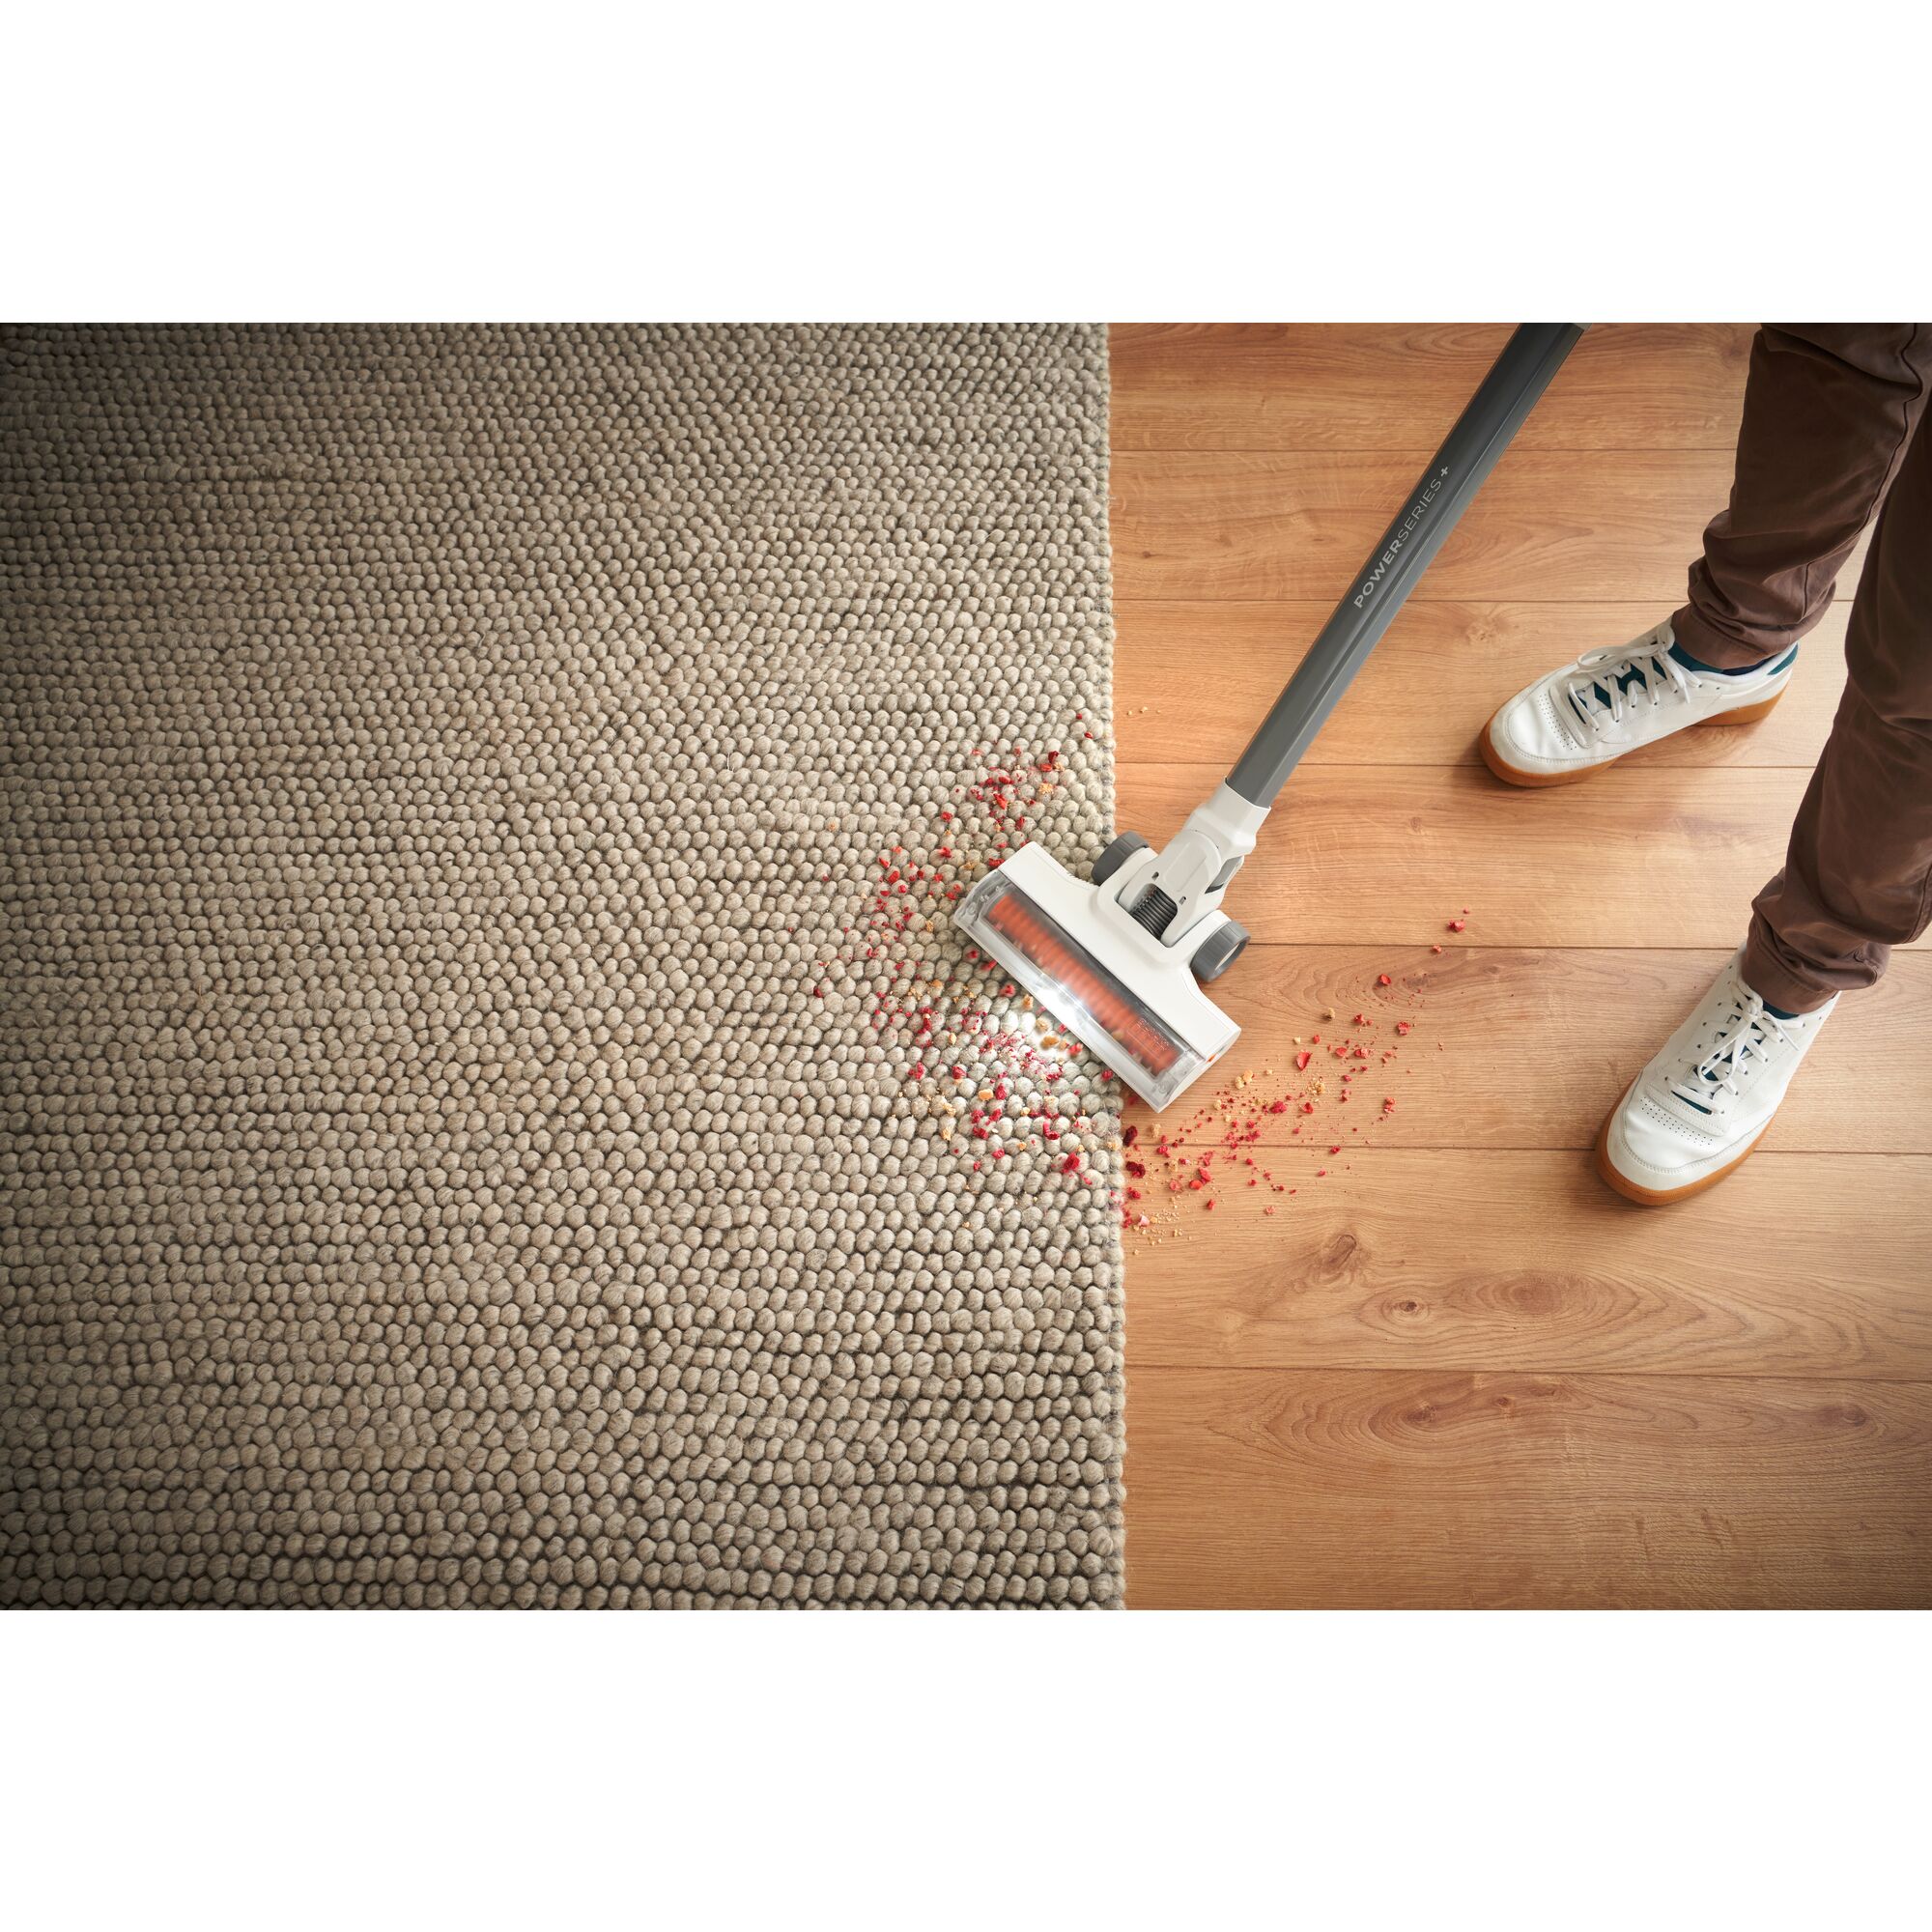 POWER SERIES cordless stick vacuum being used to clean debris on wooden floor and rug.